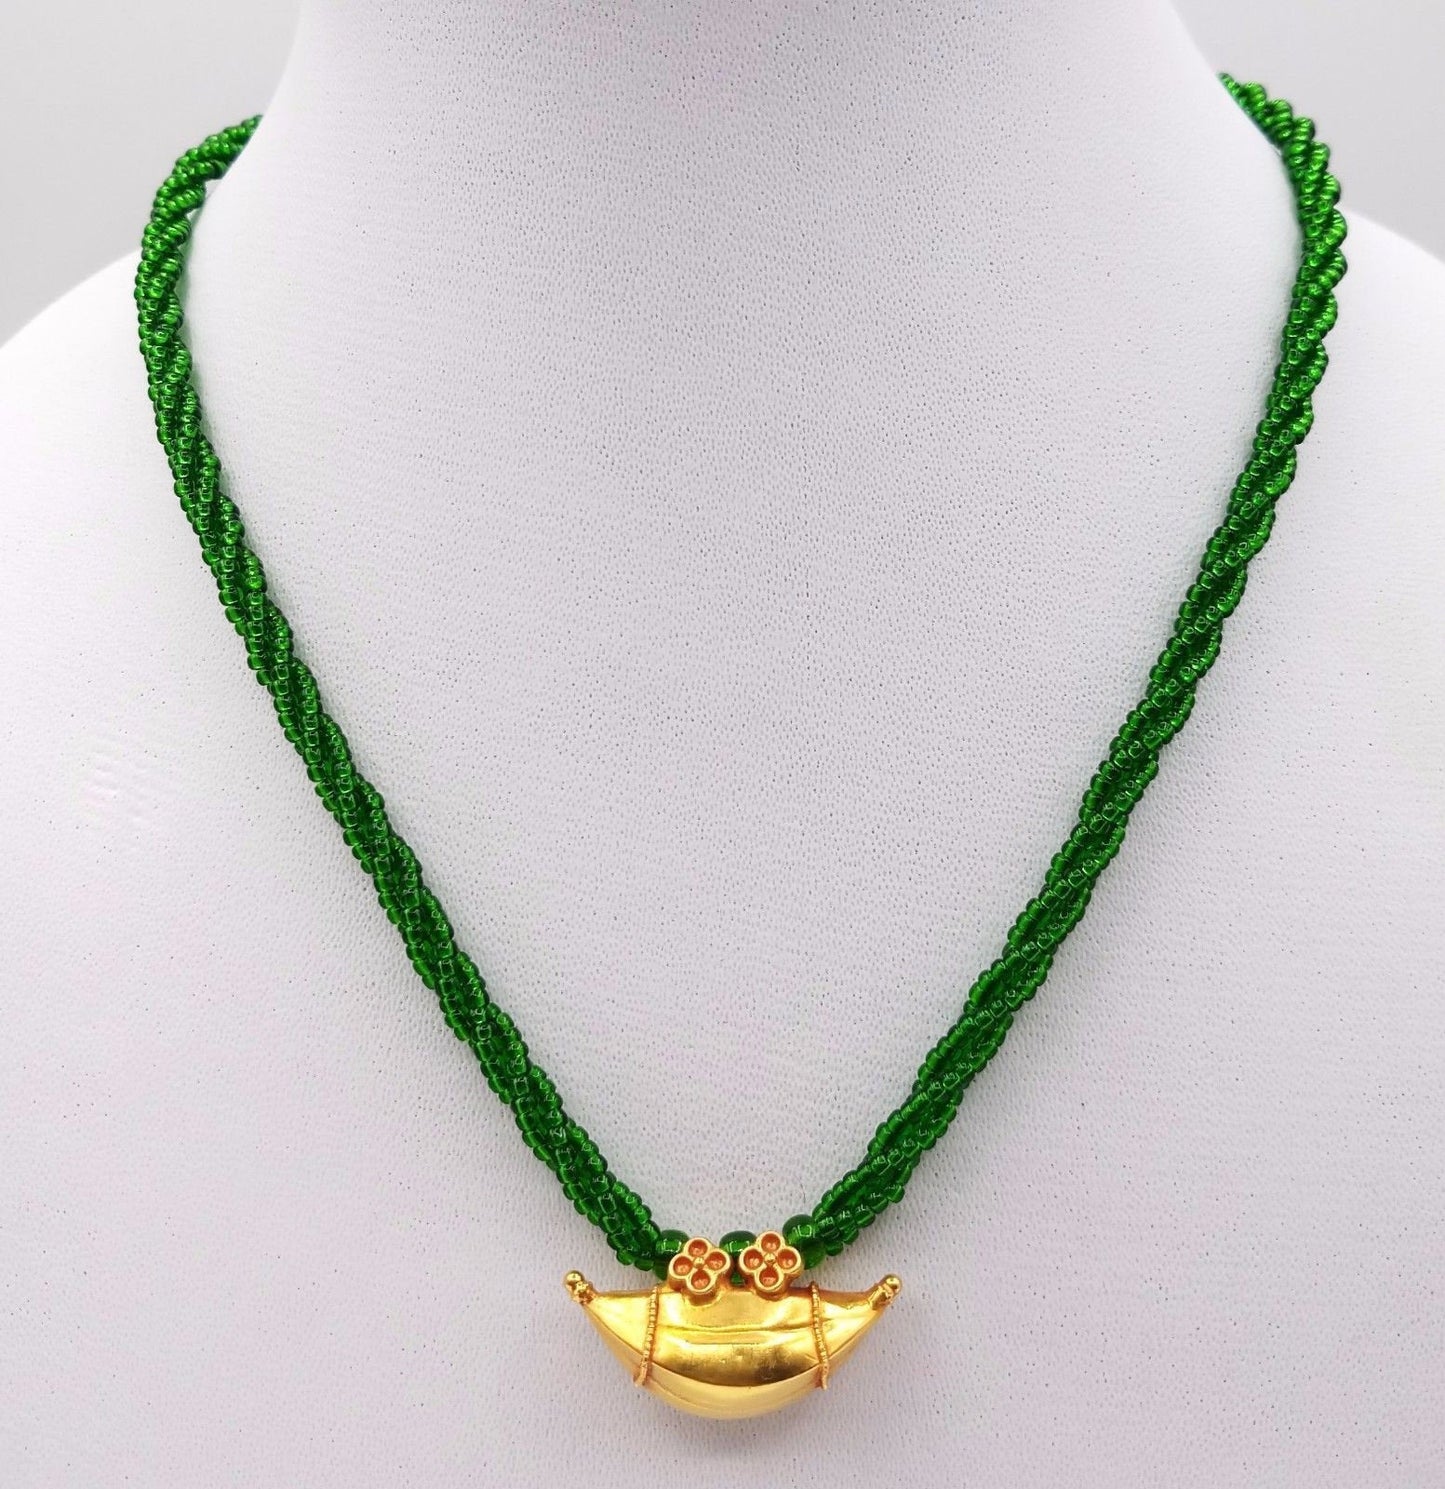 Vintage antique handmade 20k gold amulet pendant from rajasthan india fabulous pendant tribal jewelry with green color stone necklace - TRIBAL ORNAMENTS